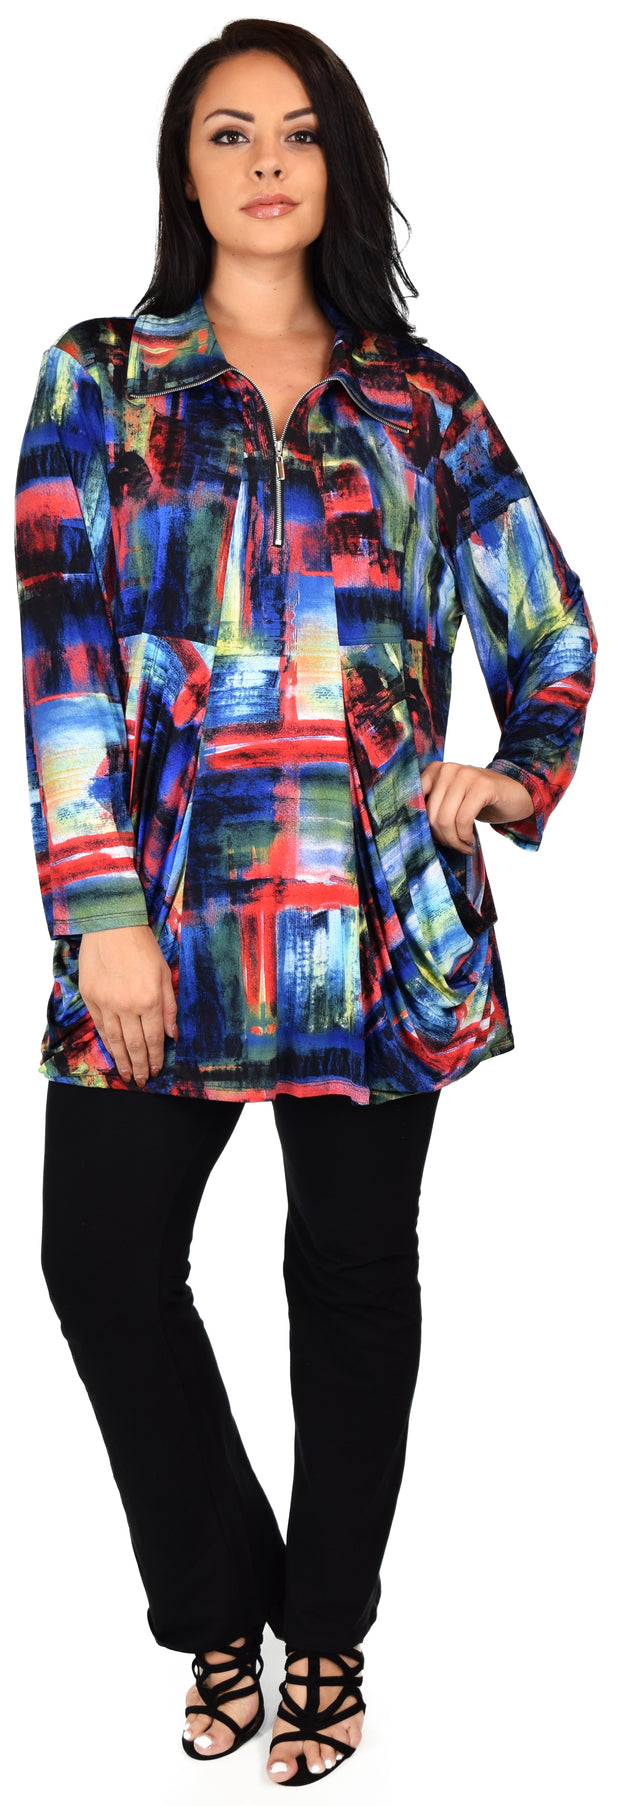 Made in USA, Celebrity Designer Exotic Print Tunic, Travelers Tunic,  Plus Size Tunic, Lagenlook Tunic, Large to 3XL